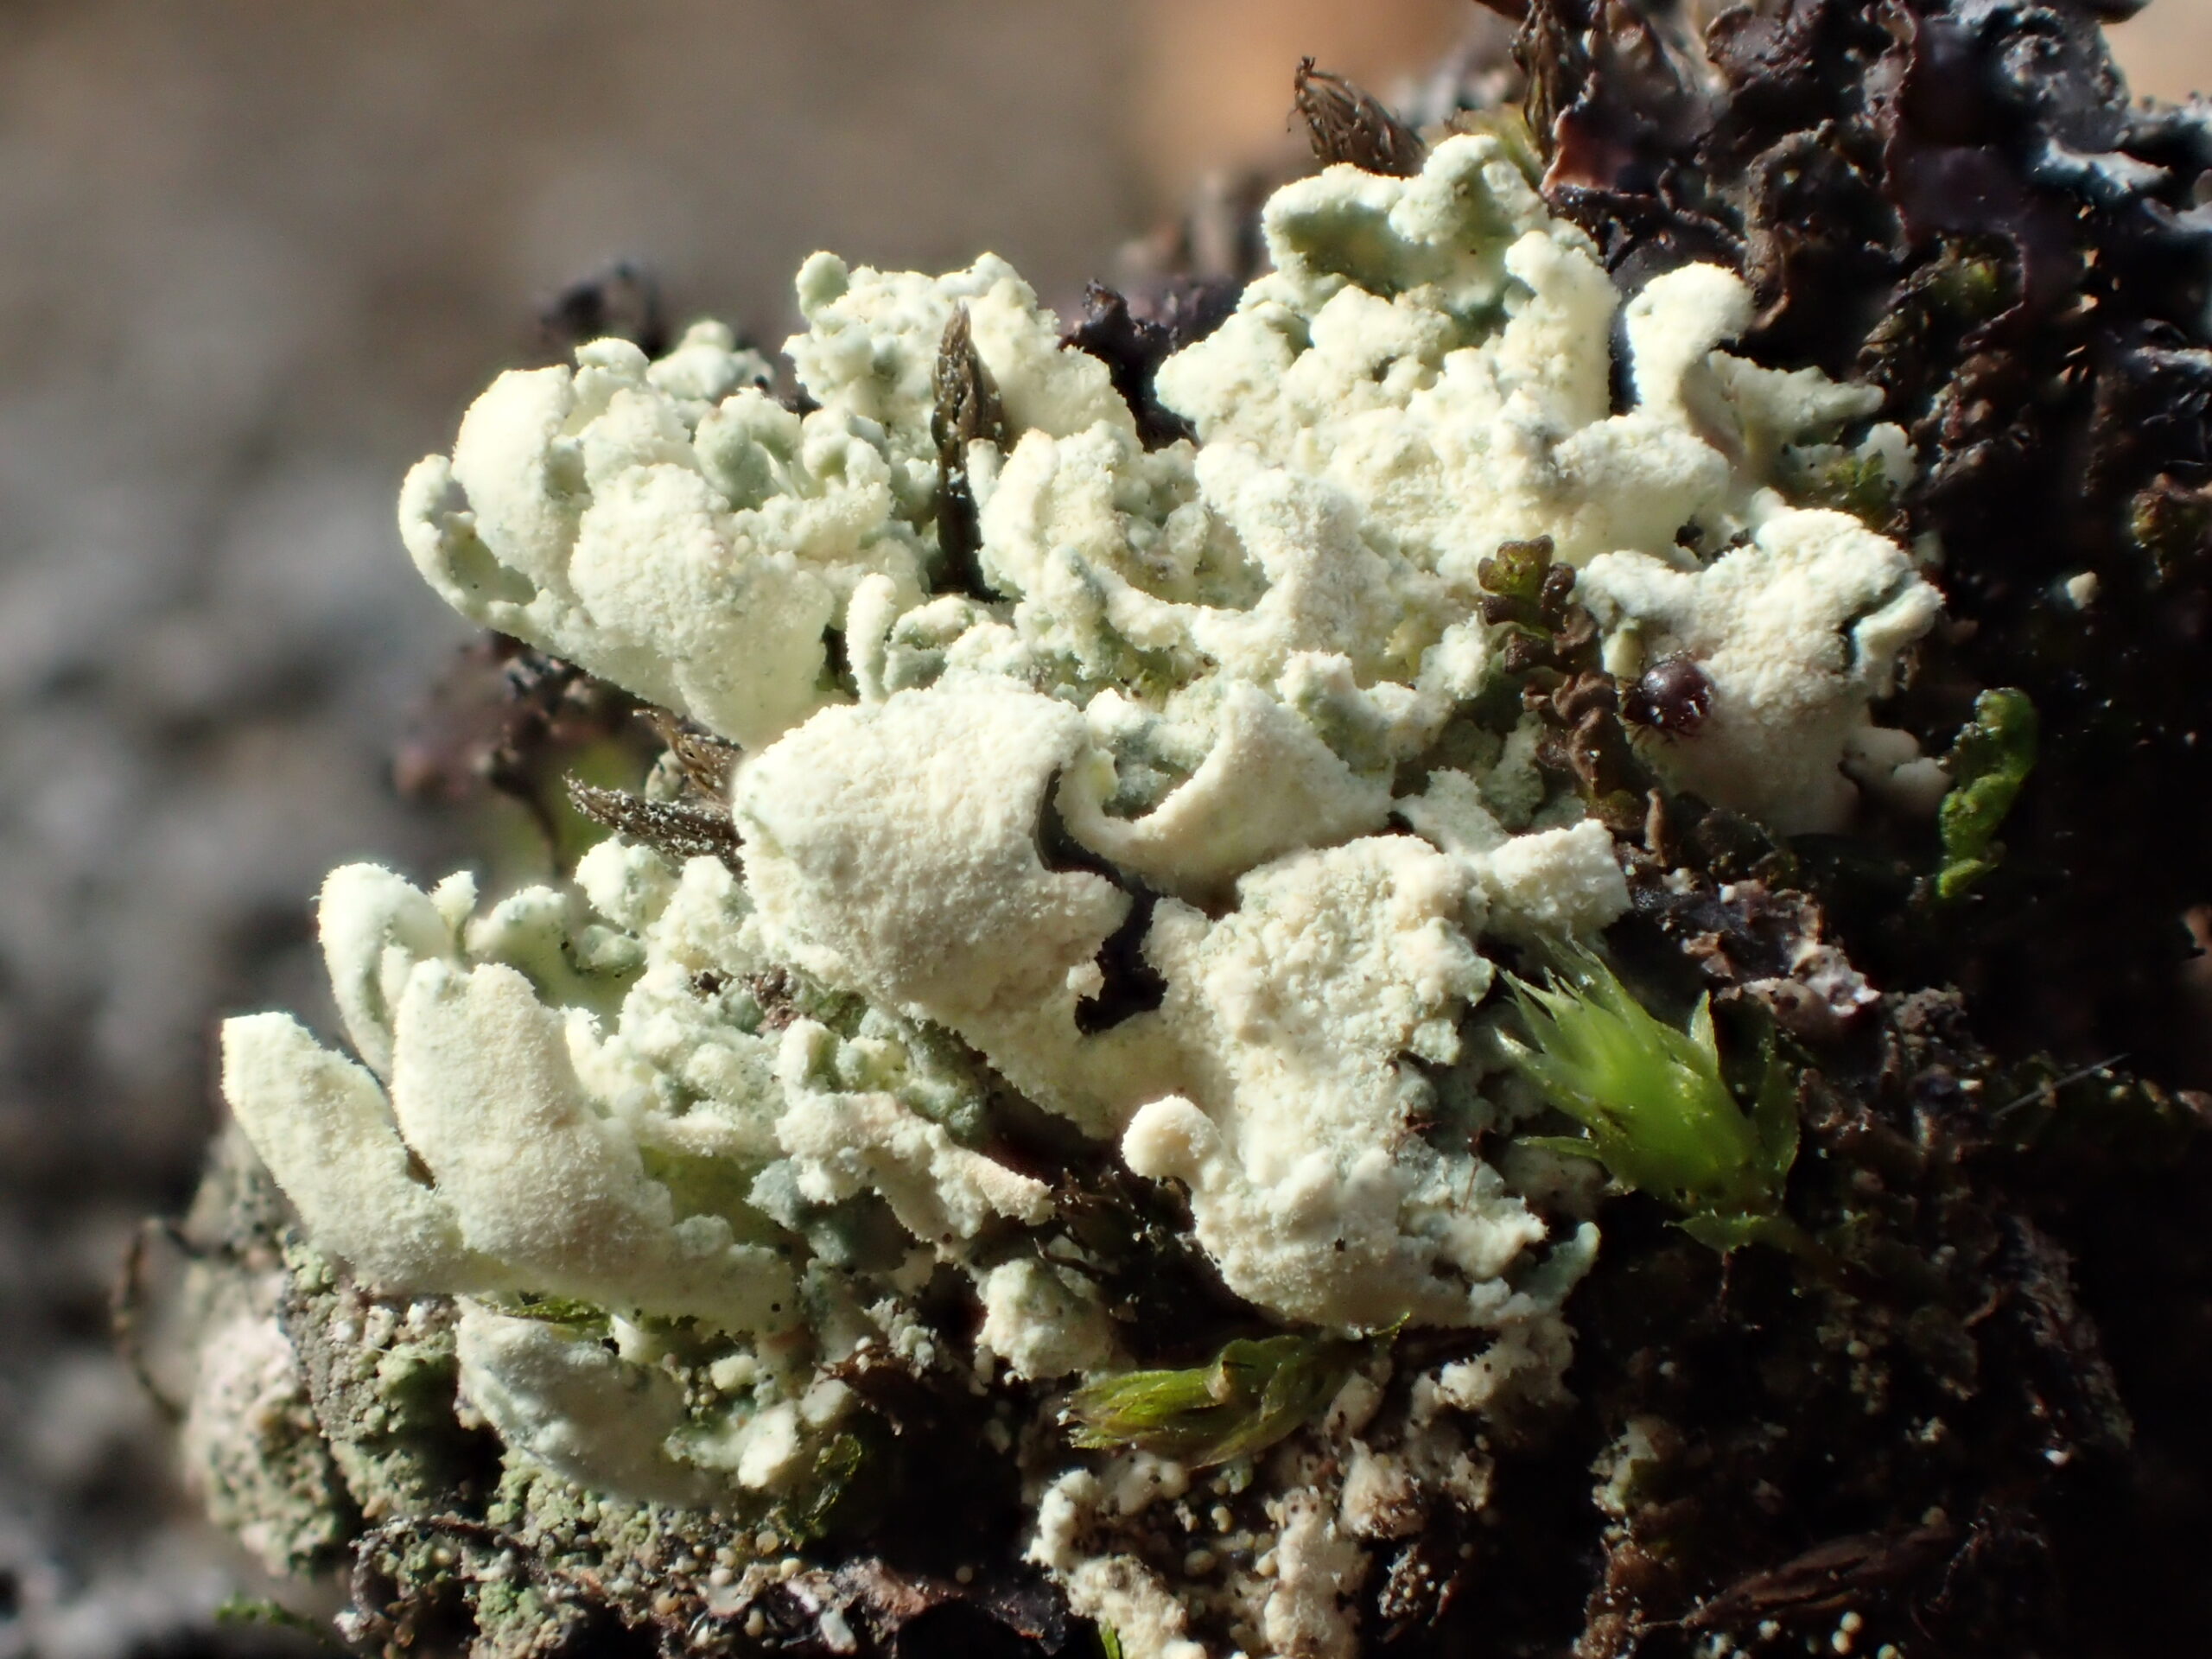 Cladonia luteoalba: undersides of the squamules densely tomentose/fluffy